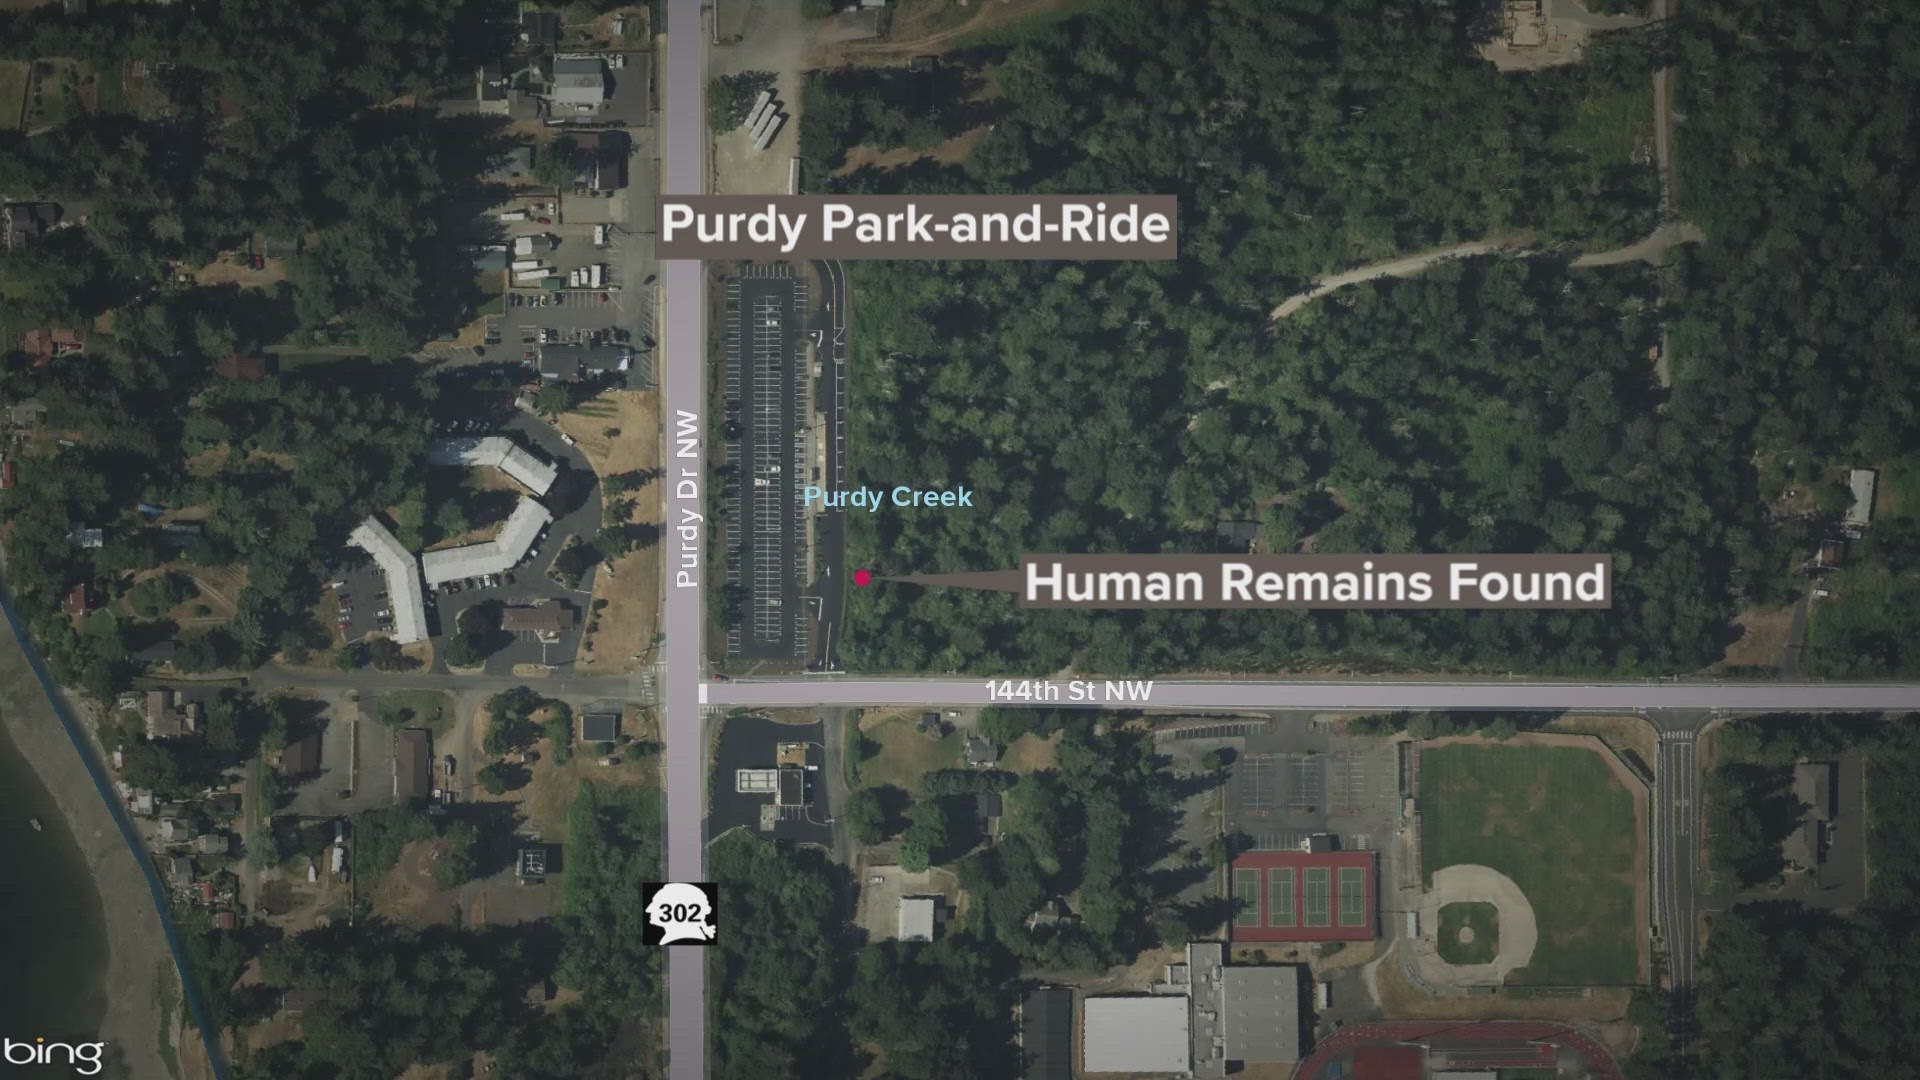 A citizen led Pierce County deputies to a creek where the human remains were found.